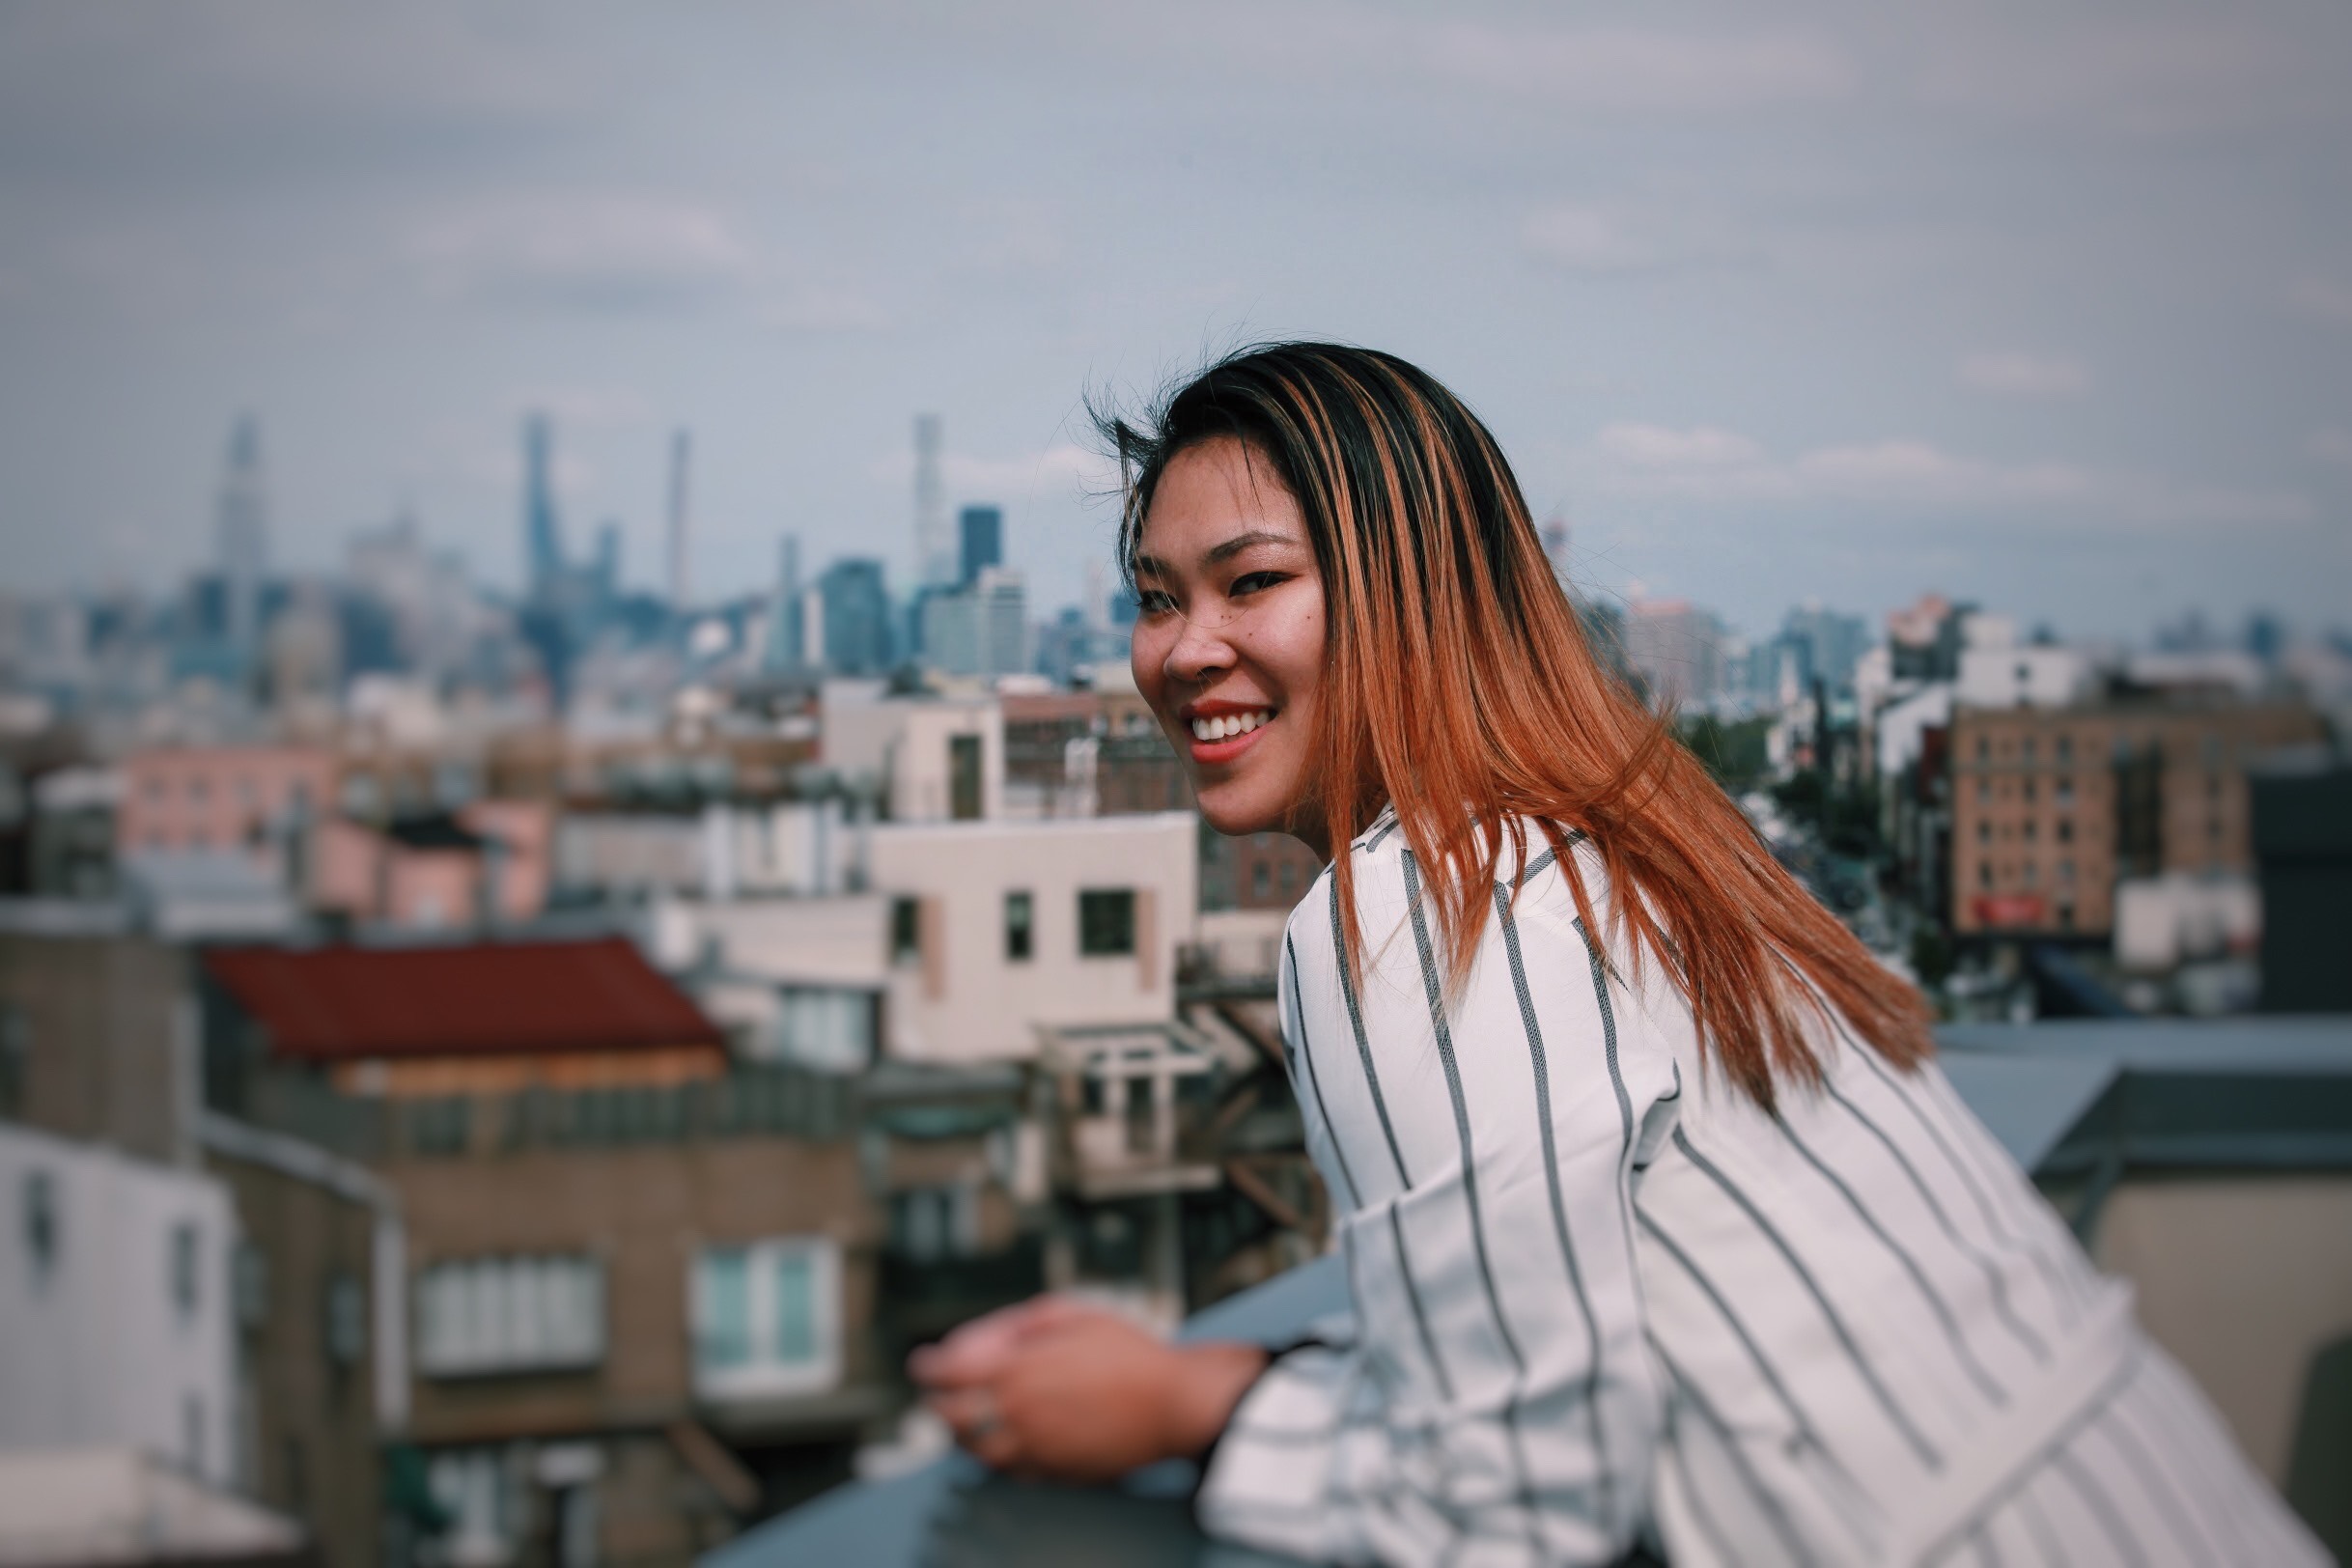 Agatha smiling on rooftop